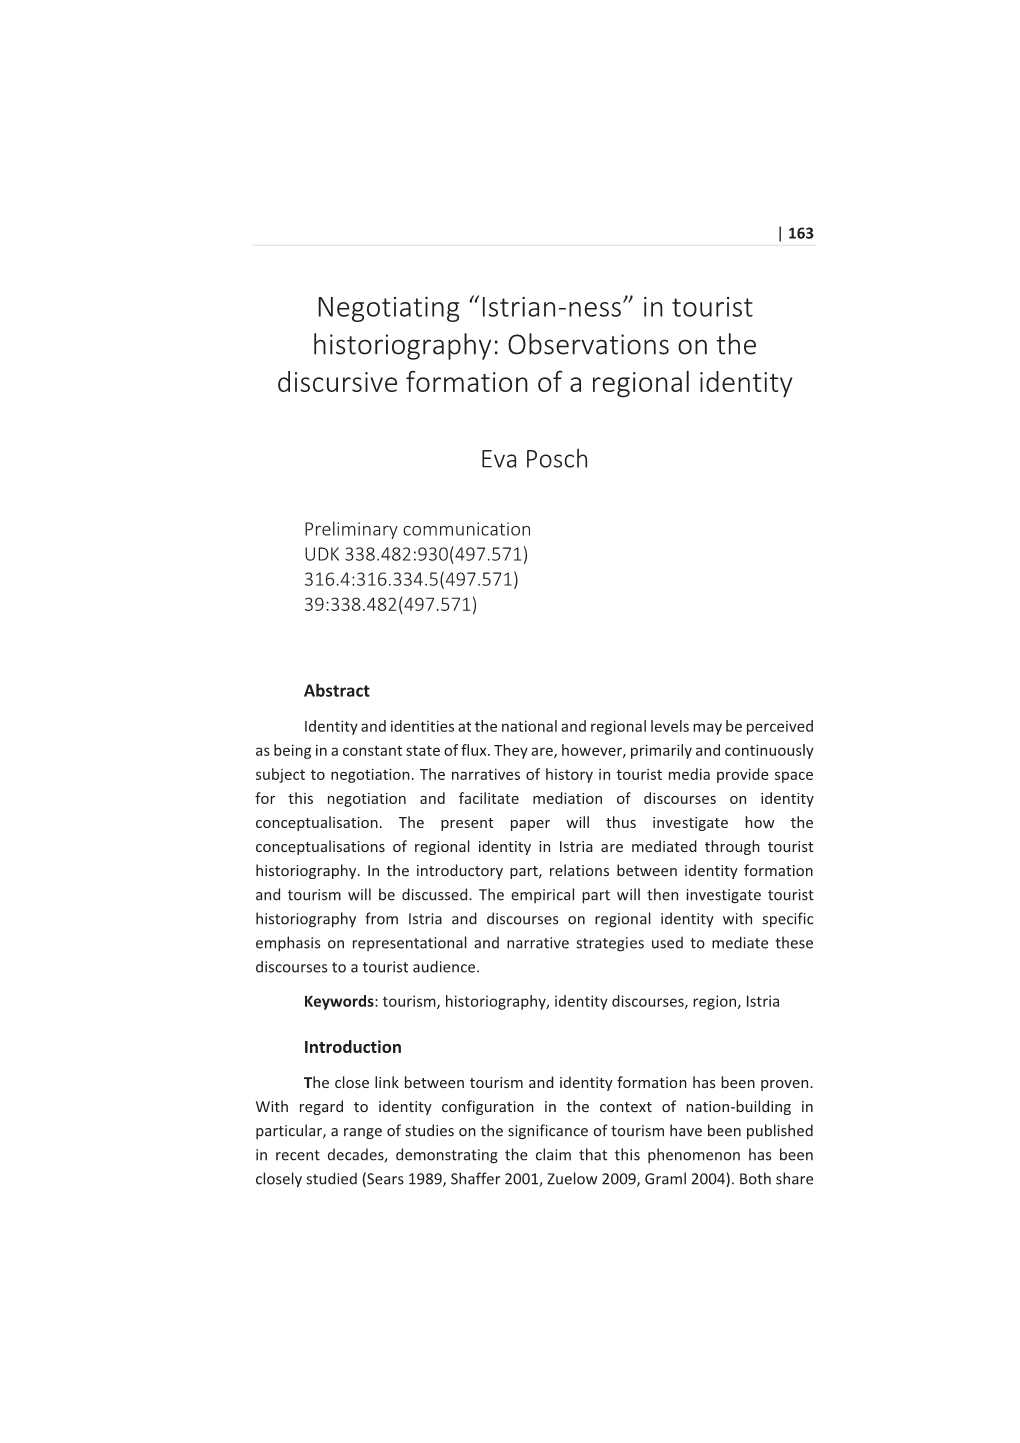 Negotiating “Istrian-Ness” in Tourist Historiography: Observations on the Discursive Formation of a Regional Identity